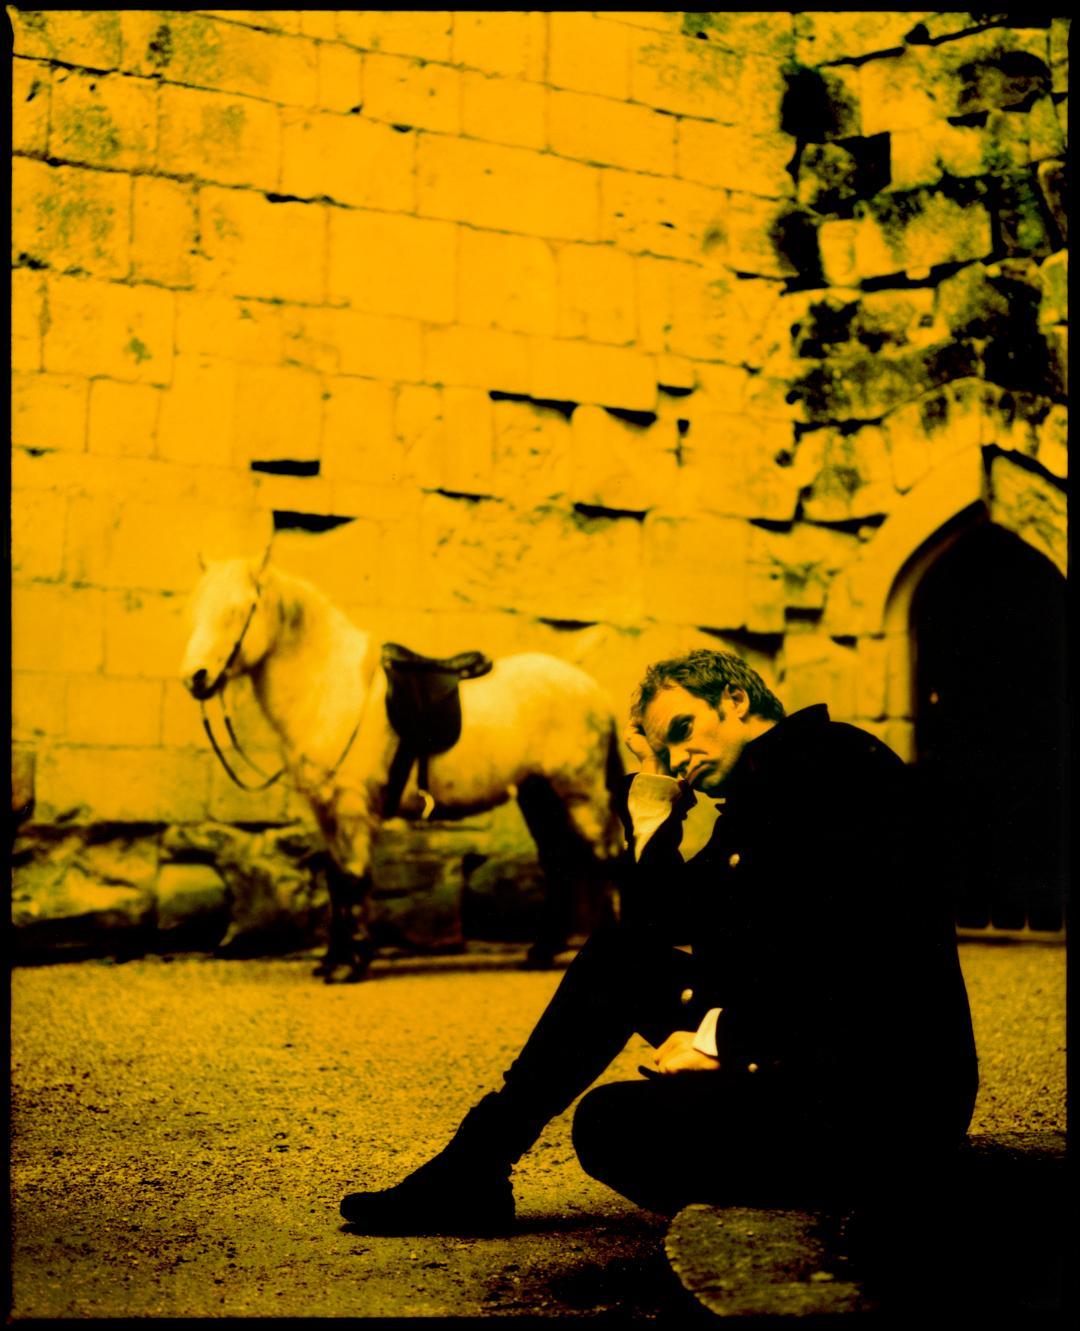 Sting 

Sting’s album cover photograph for “Ten Summoners Tales”

2022

by Kevin Westenberg
Signed Limited Edition

Kevin Westenberg is famed for his creation of provocative and electrifying images of world-class musicians, artists and movie stars